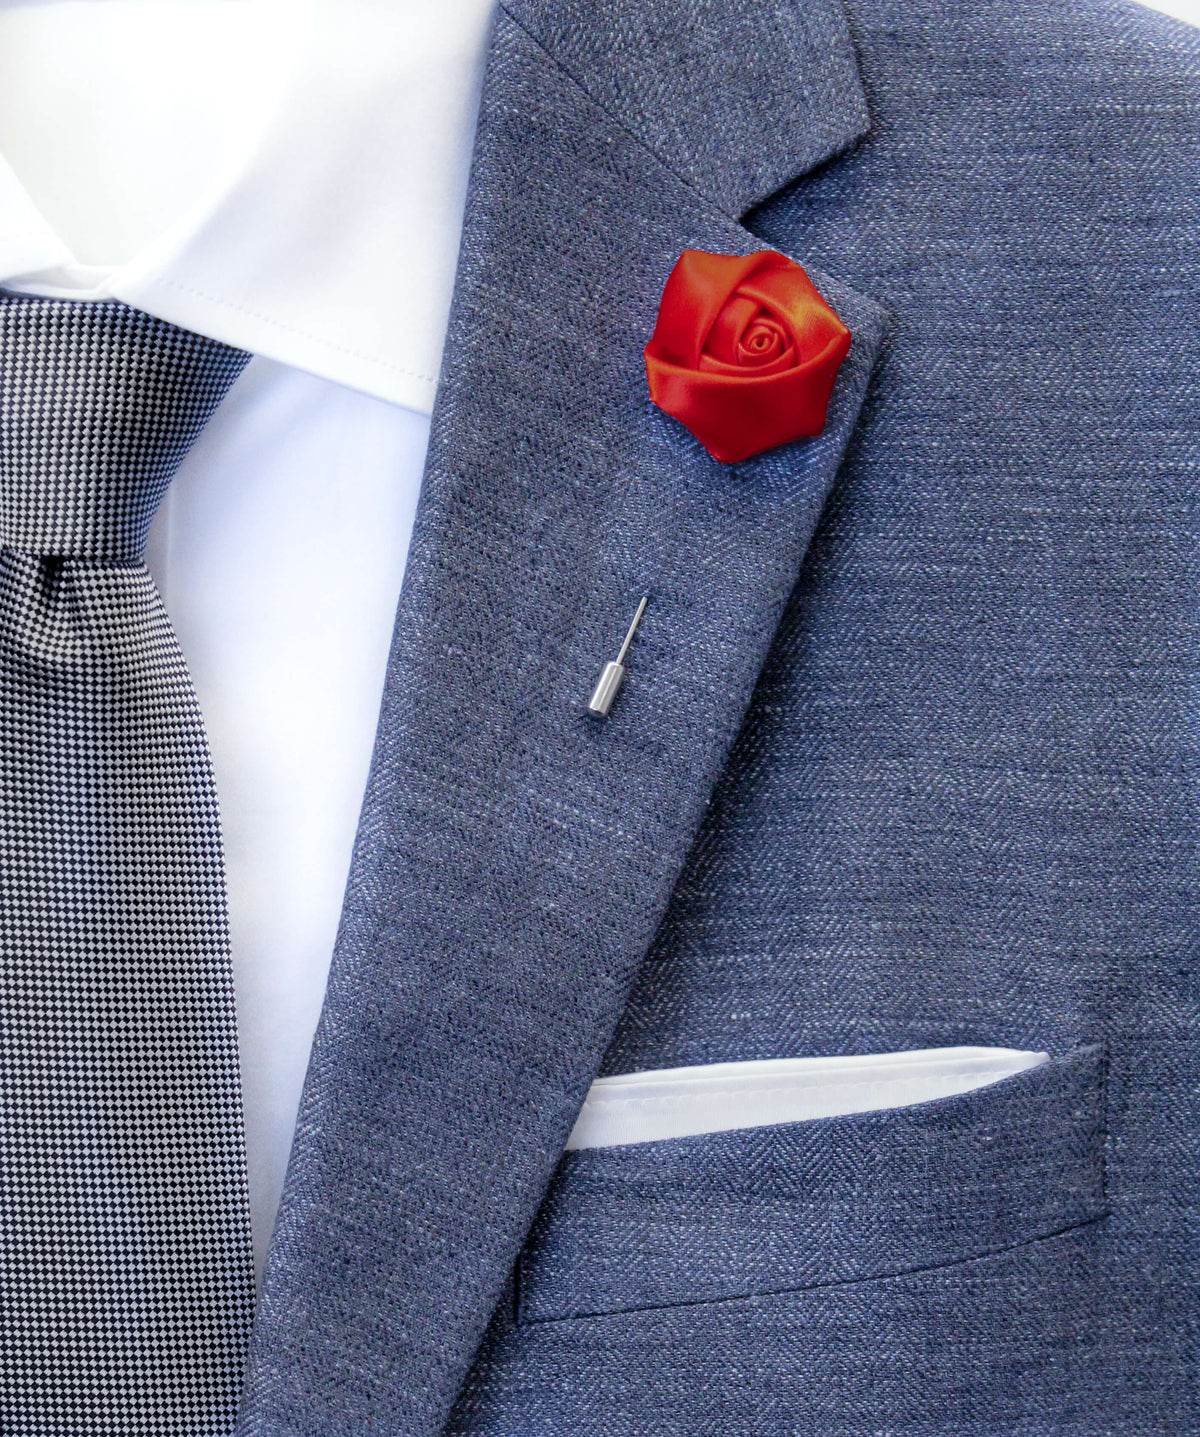 Addicted to Love Flower Lapel Pin